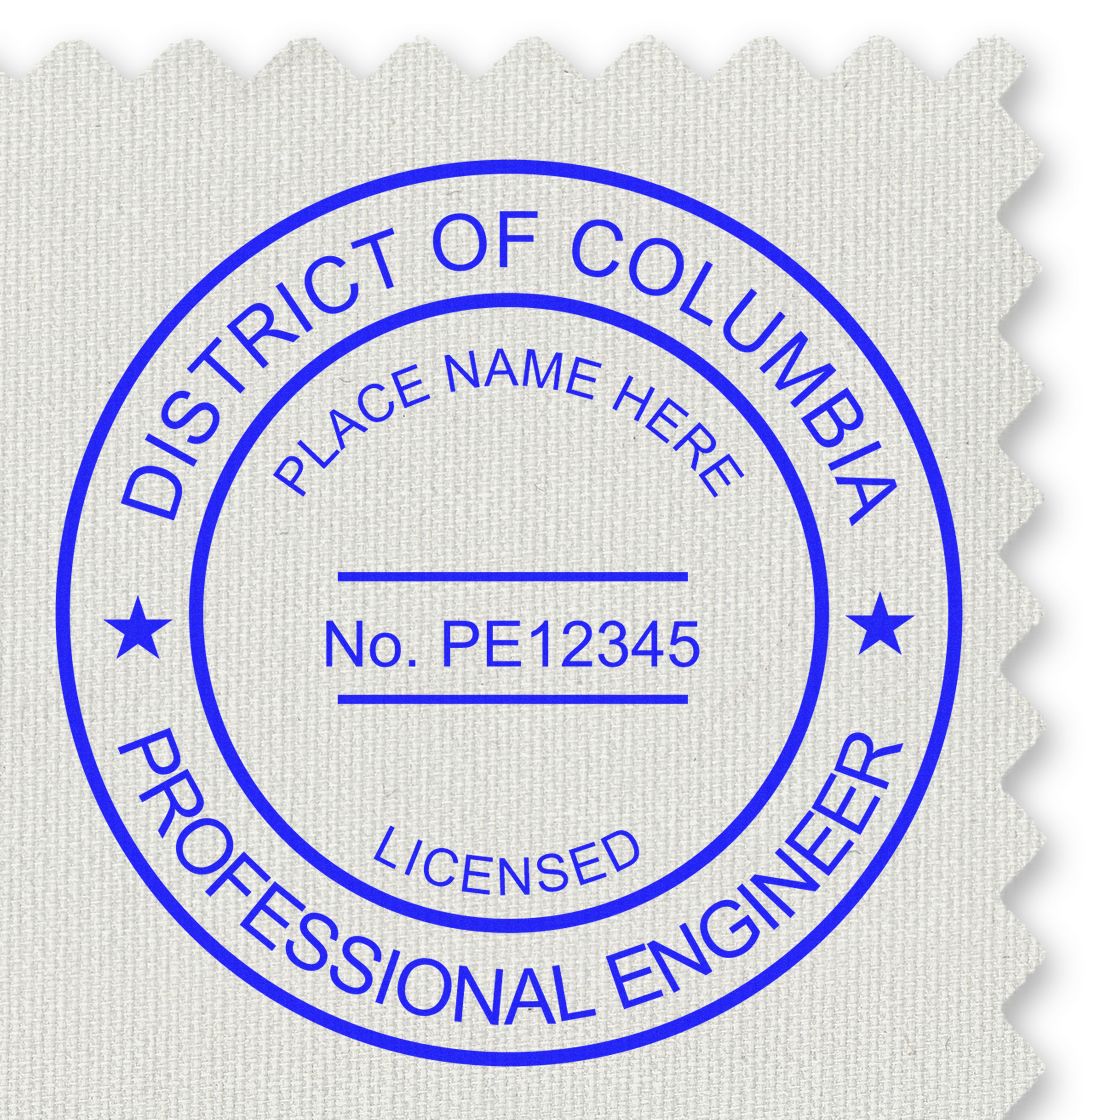 An alternative view of the District of Columbia Professional Engineer Seal Stamp stamped on a sheet of paper showing the image in use